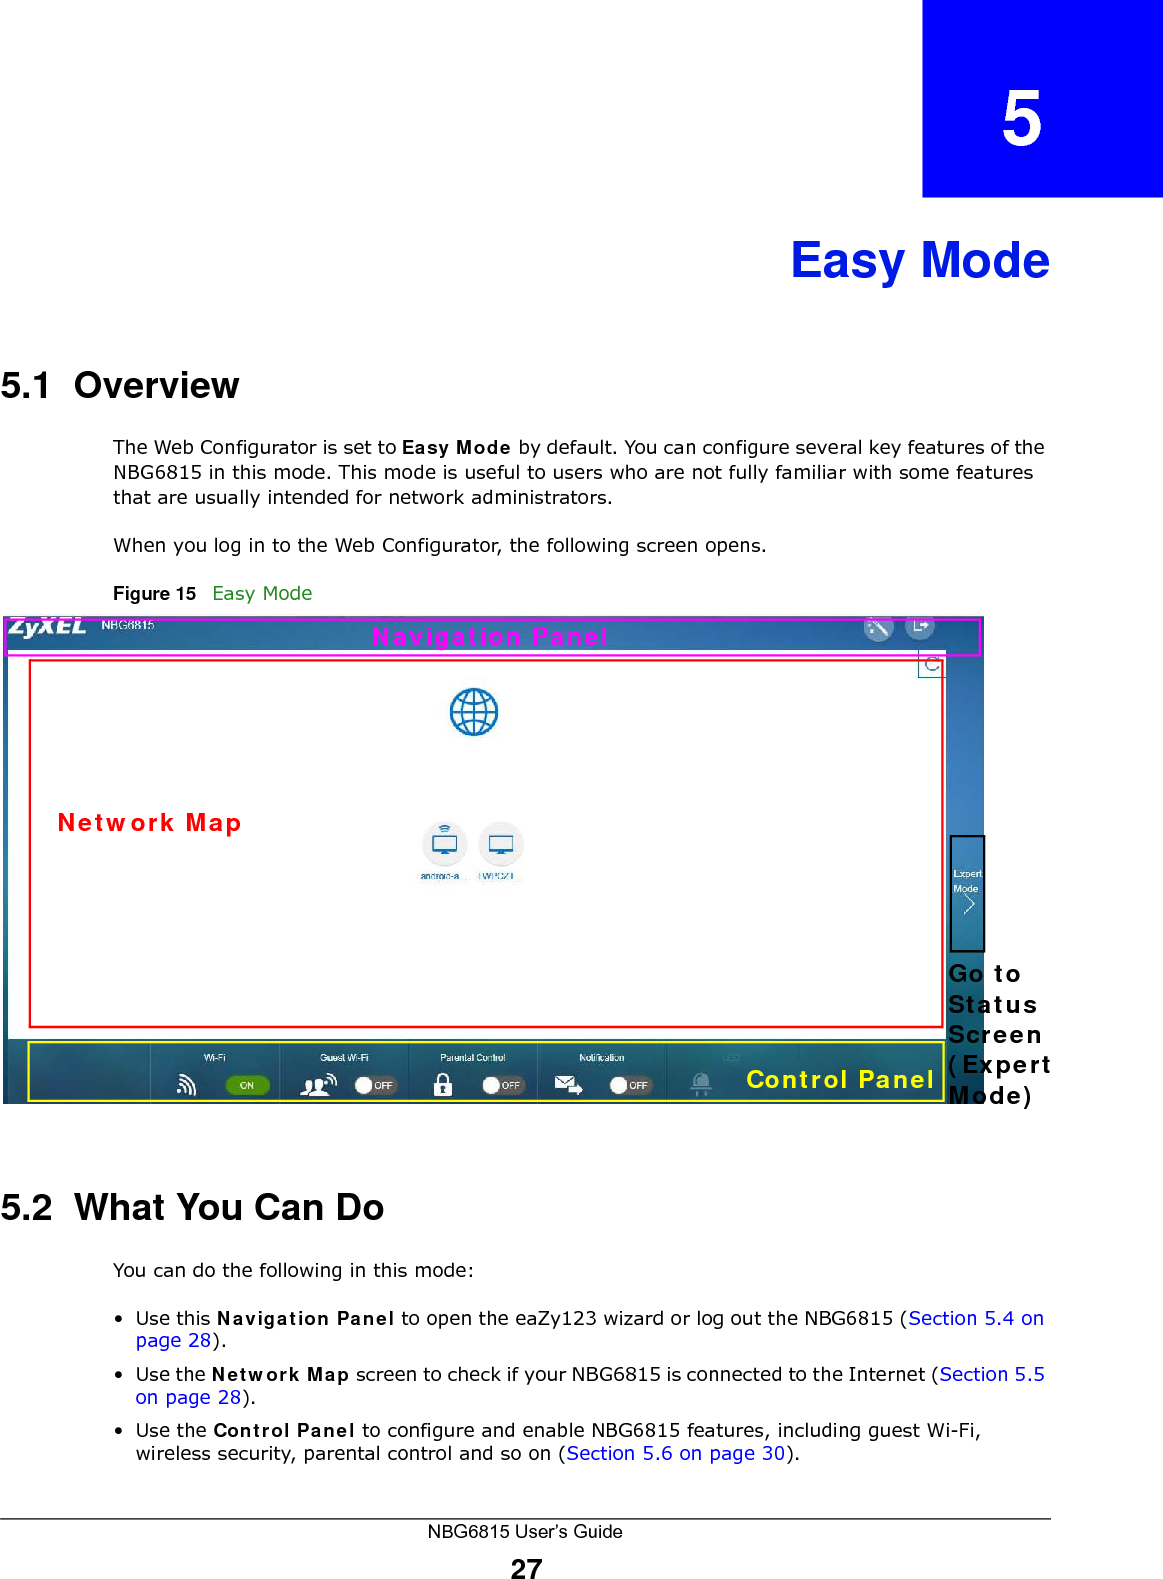 NBG6815 User’s Guide27CHAPTER   5Easy Mode5.1  OverviewThe Web Configurator is set to Easy Mode by default. You can configure several key features of the NBG6815 in this mode. This mode is useful to users who are not fully familiar with some features that are usually intended for network administrators.When you log in to the Web Configurator, the following screen opens.Figure 15   Easy Mode 5.2  What You Can DoYou can do the following in this mode:•Use this Navigation Panel to open the eaZy123 wizard or log out the NBG6815 (Section 5.4 on page 28).•Use the Network Map screen to check if your NBG6815 is connected to the Internet (Section 5.5 on page 28).•Use the Control Panel to configure and enable NBG6815 features, including guest Wi-Fi, wireless security, parental control and so on (Section 5.6 on page 30).Network MapNavigation PanelControl PanelGo toStatusScreen(ExpertMode)